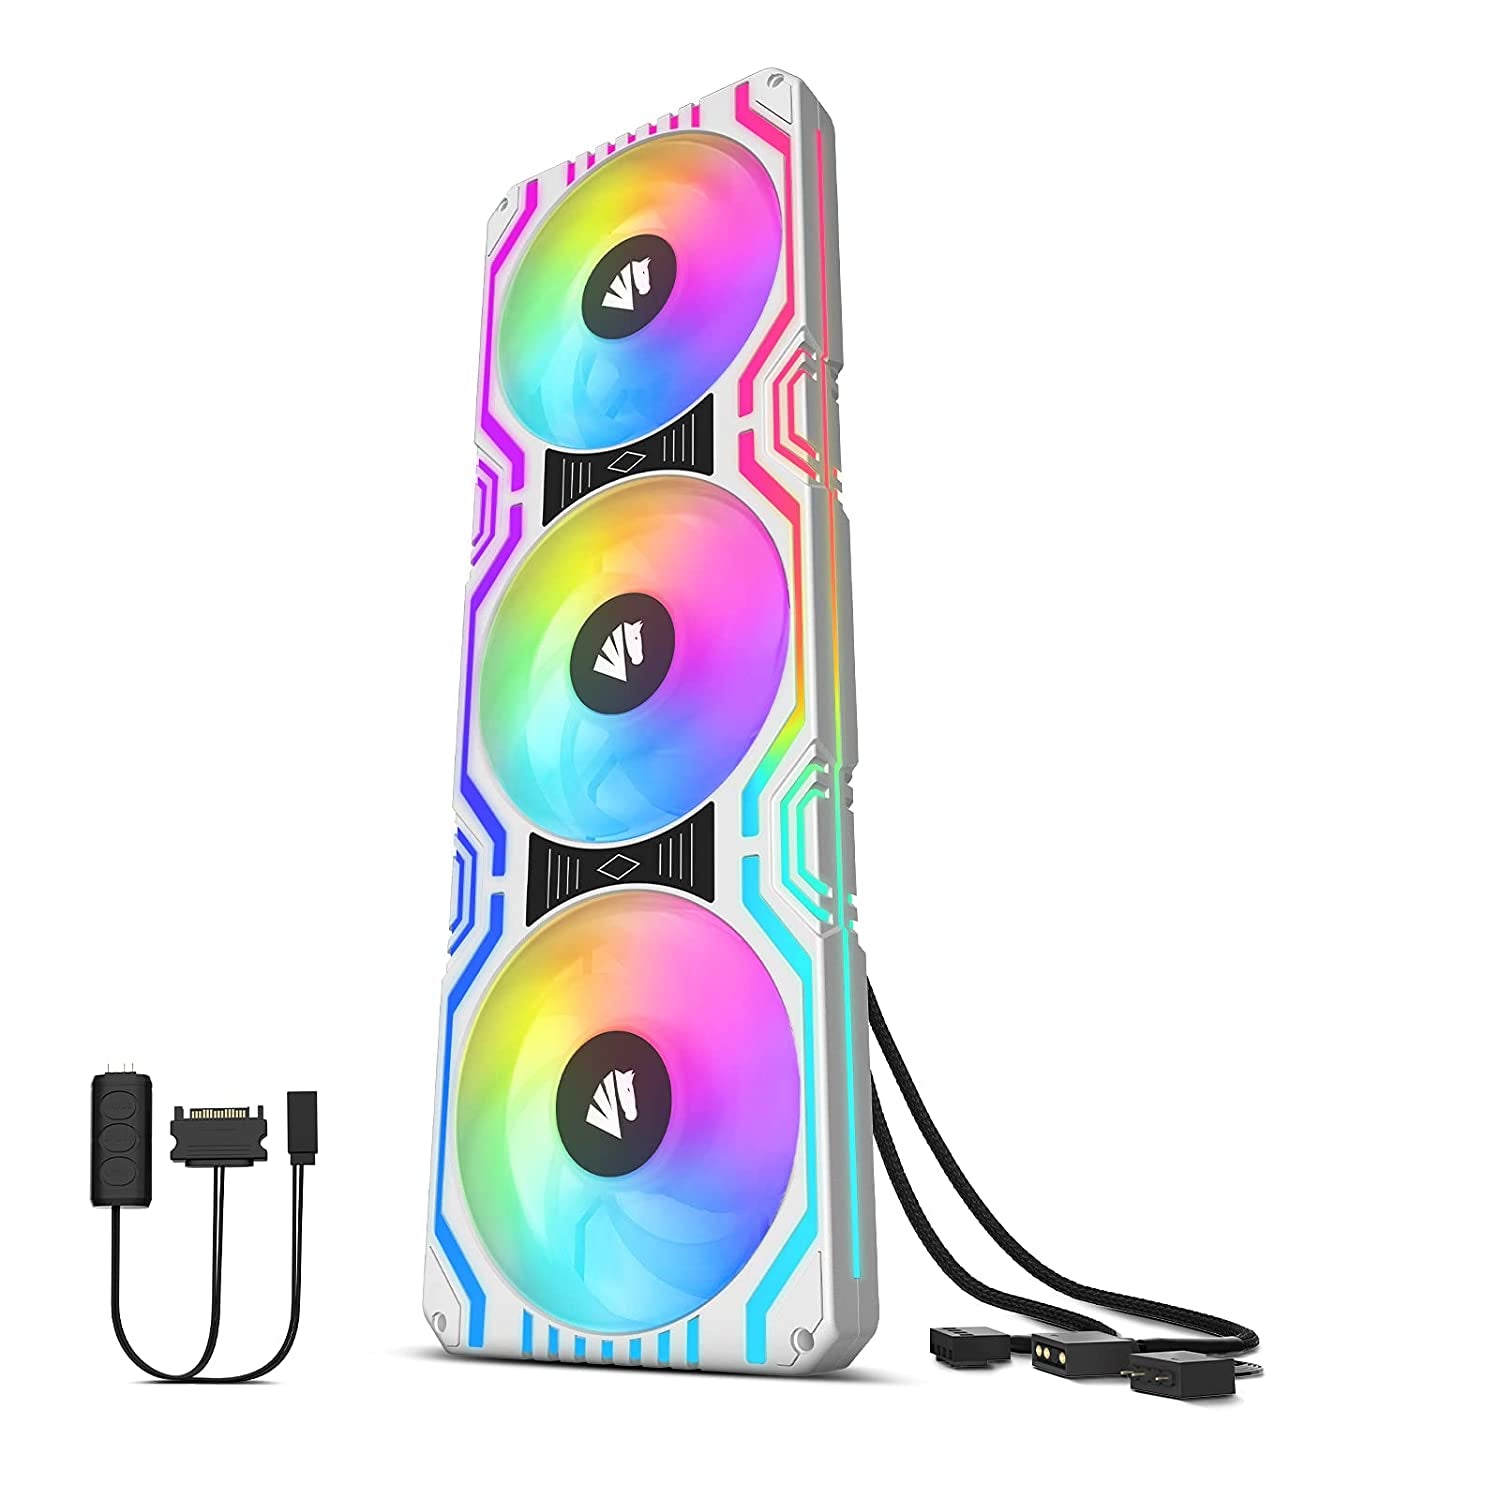 Matrix-Black 48 Addressable RGB Leds 240MM All-In-One Square Frame Integrated Fan with MB Sync/Analog Controller, Integrated PWM Control Fan for Computer Case and Liquid Cooling System